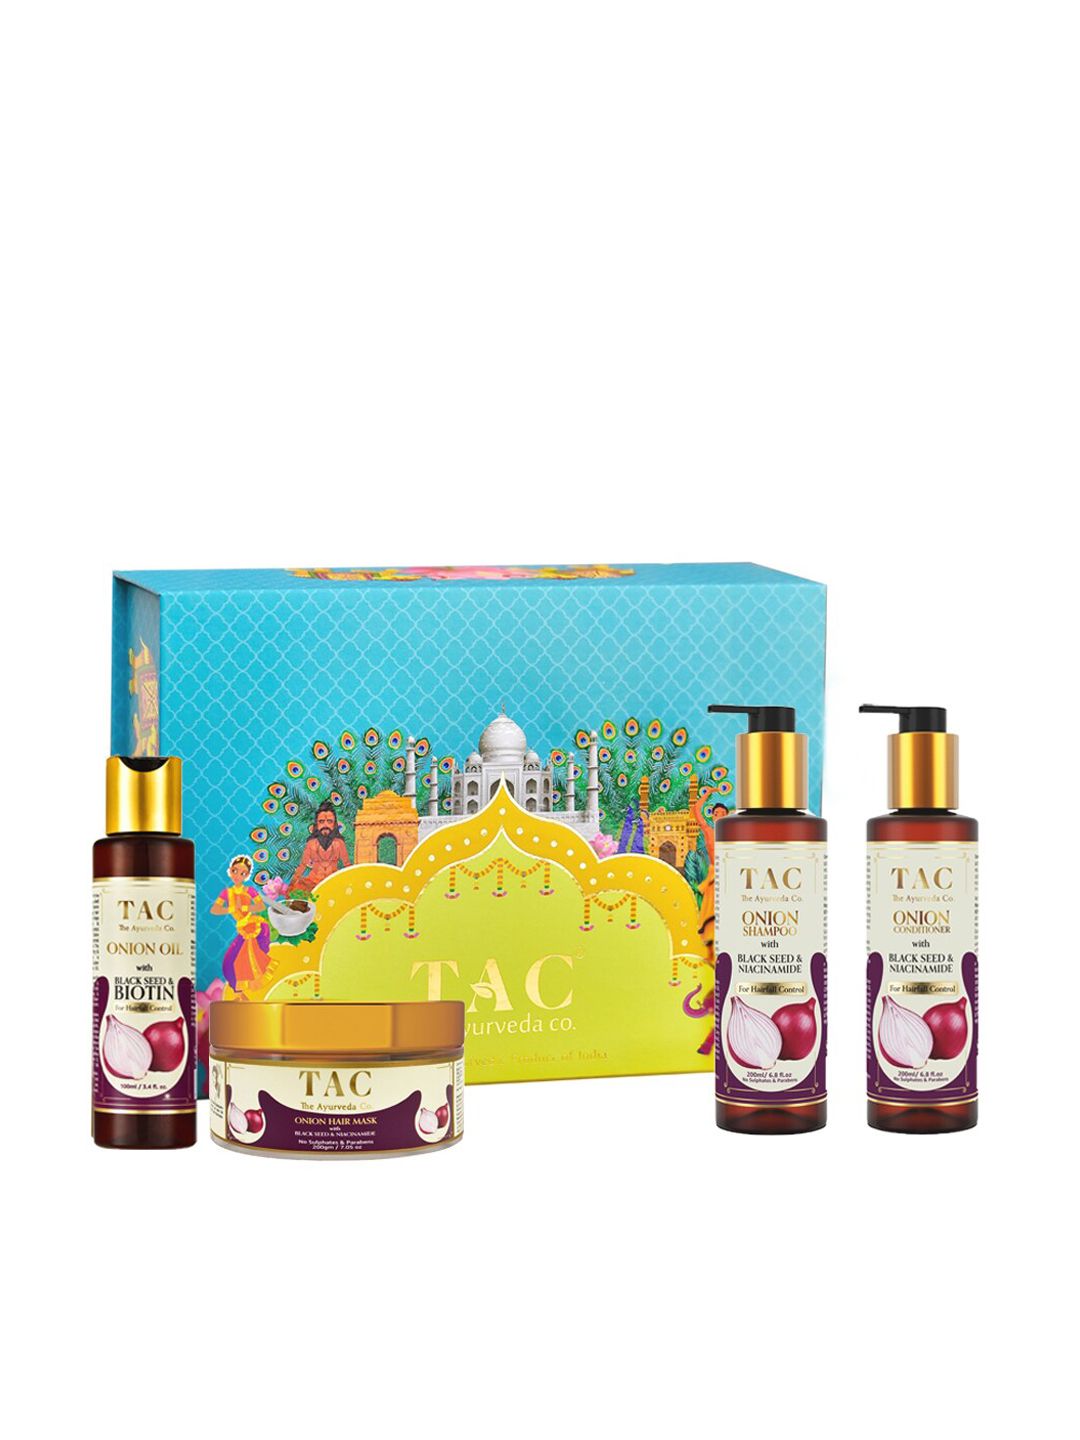 TAC - The Ayurveda Co. Red Onion & Black Seed Hair Care Range Price in India